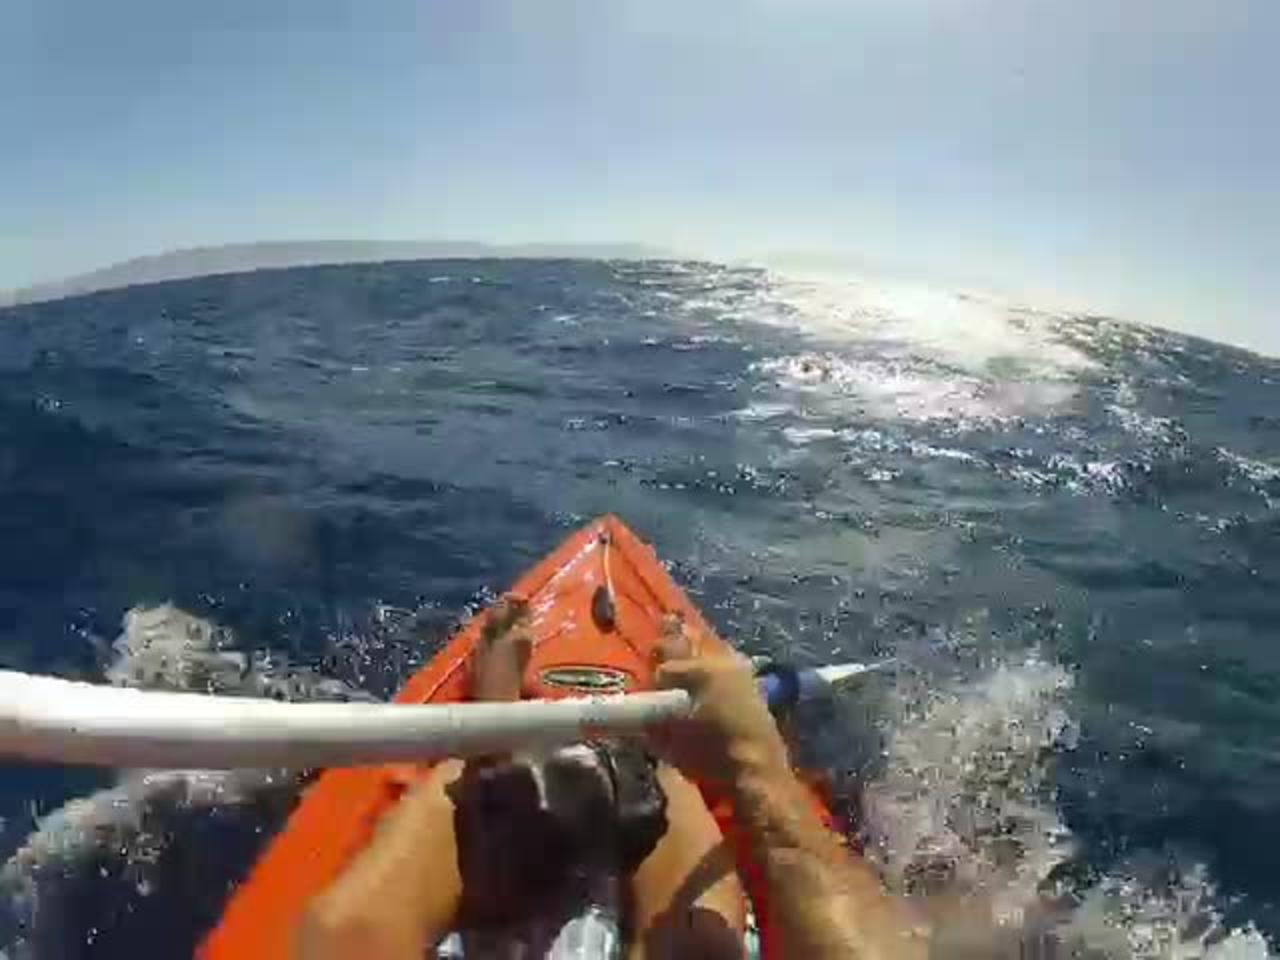 20 mile Kayak trip from Long Beach to Catalina on SMALL CRAFT WARNING DAY